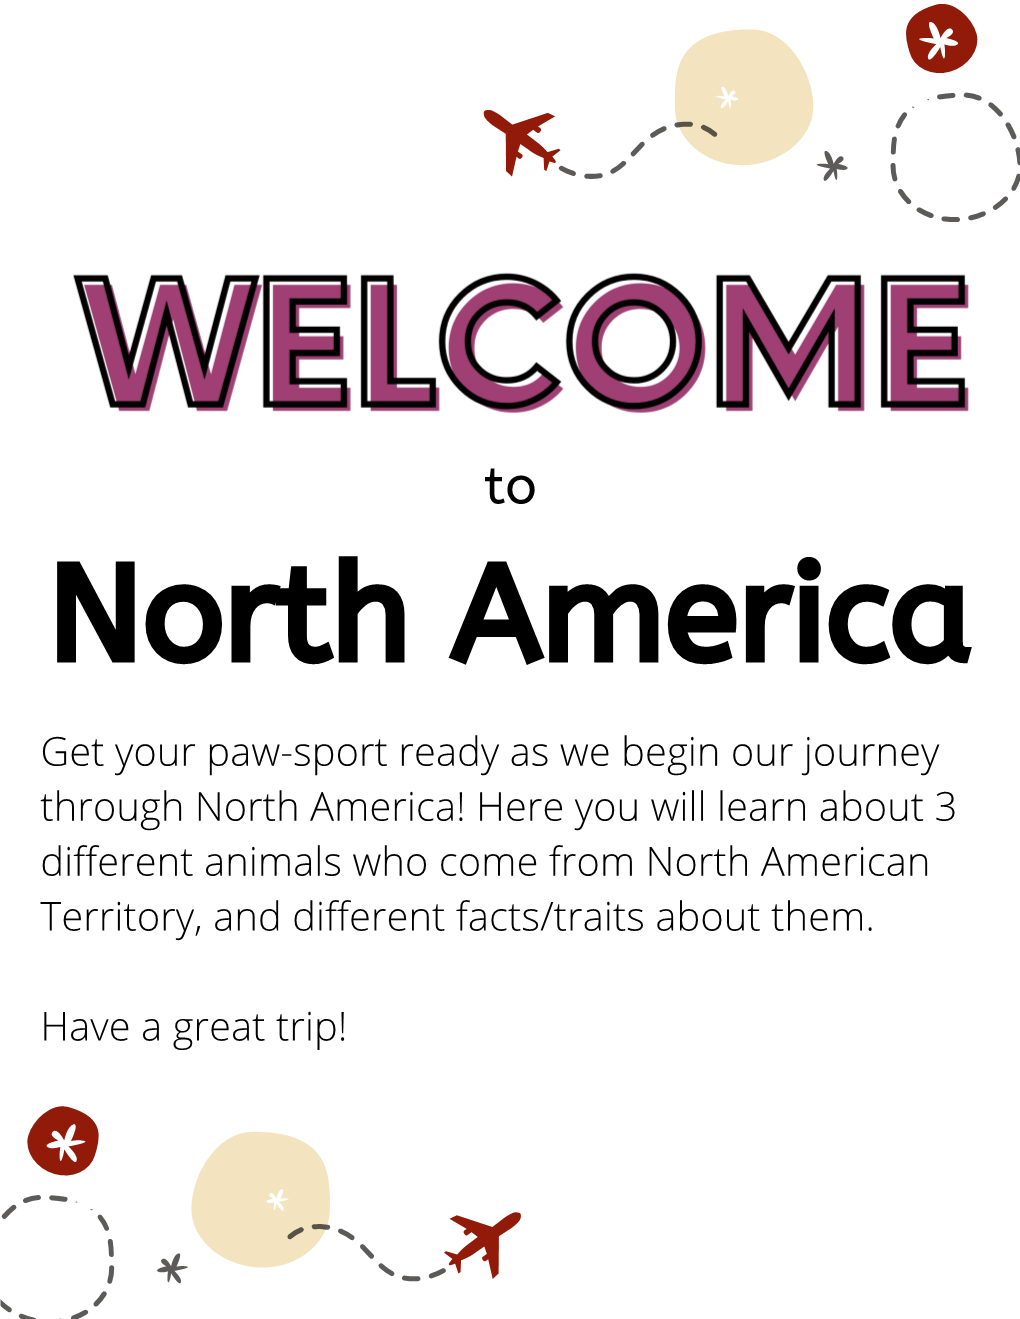 Get Your Paw-Sport Ready As We Begin Our Journey Through North America